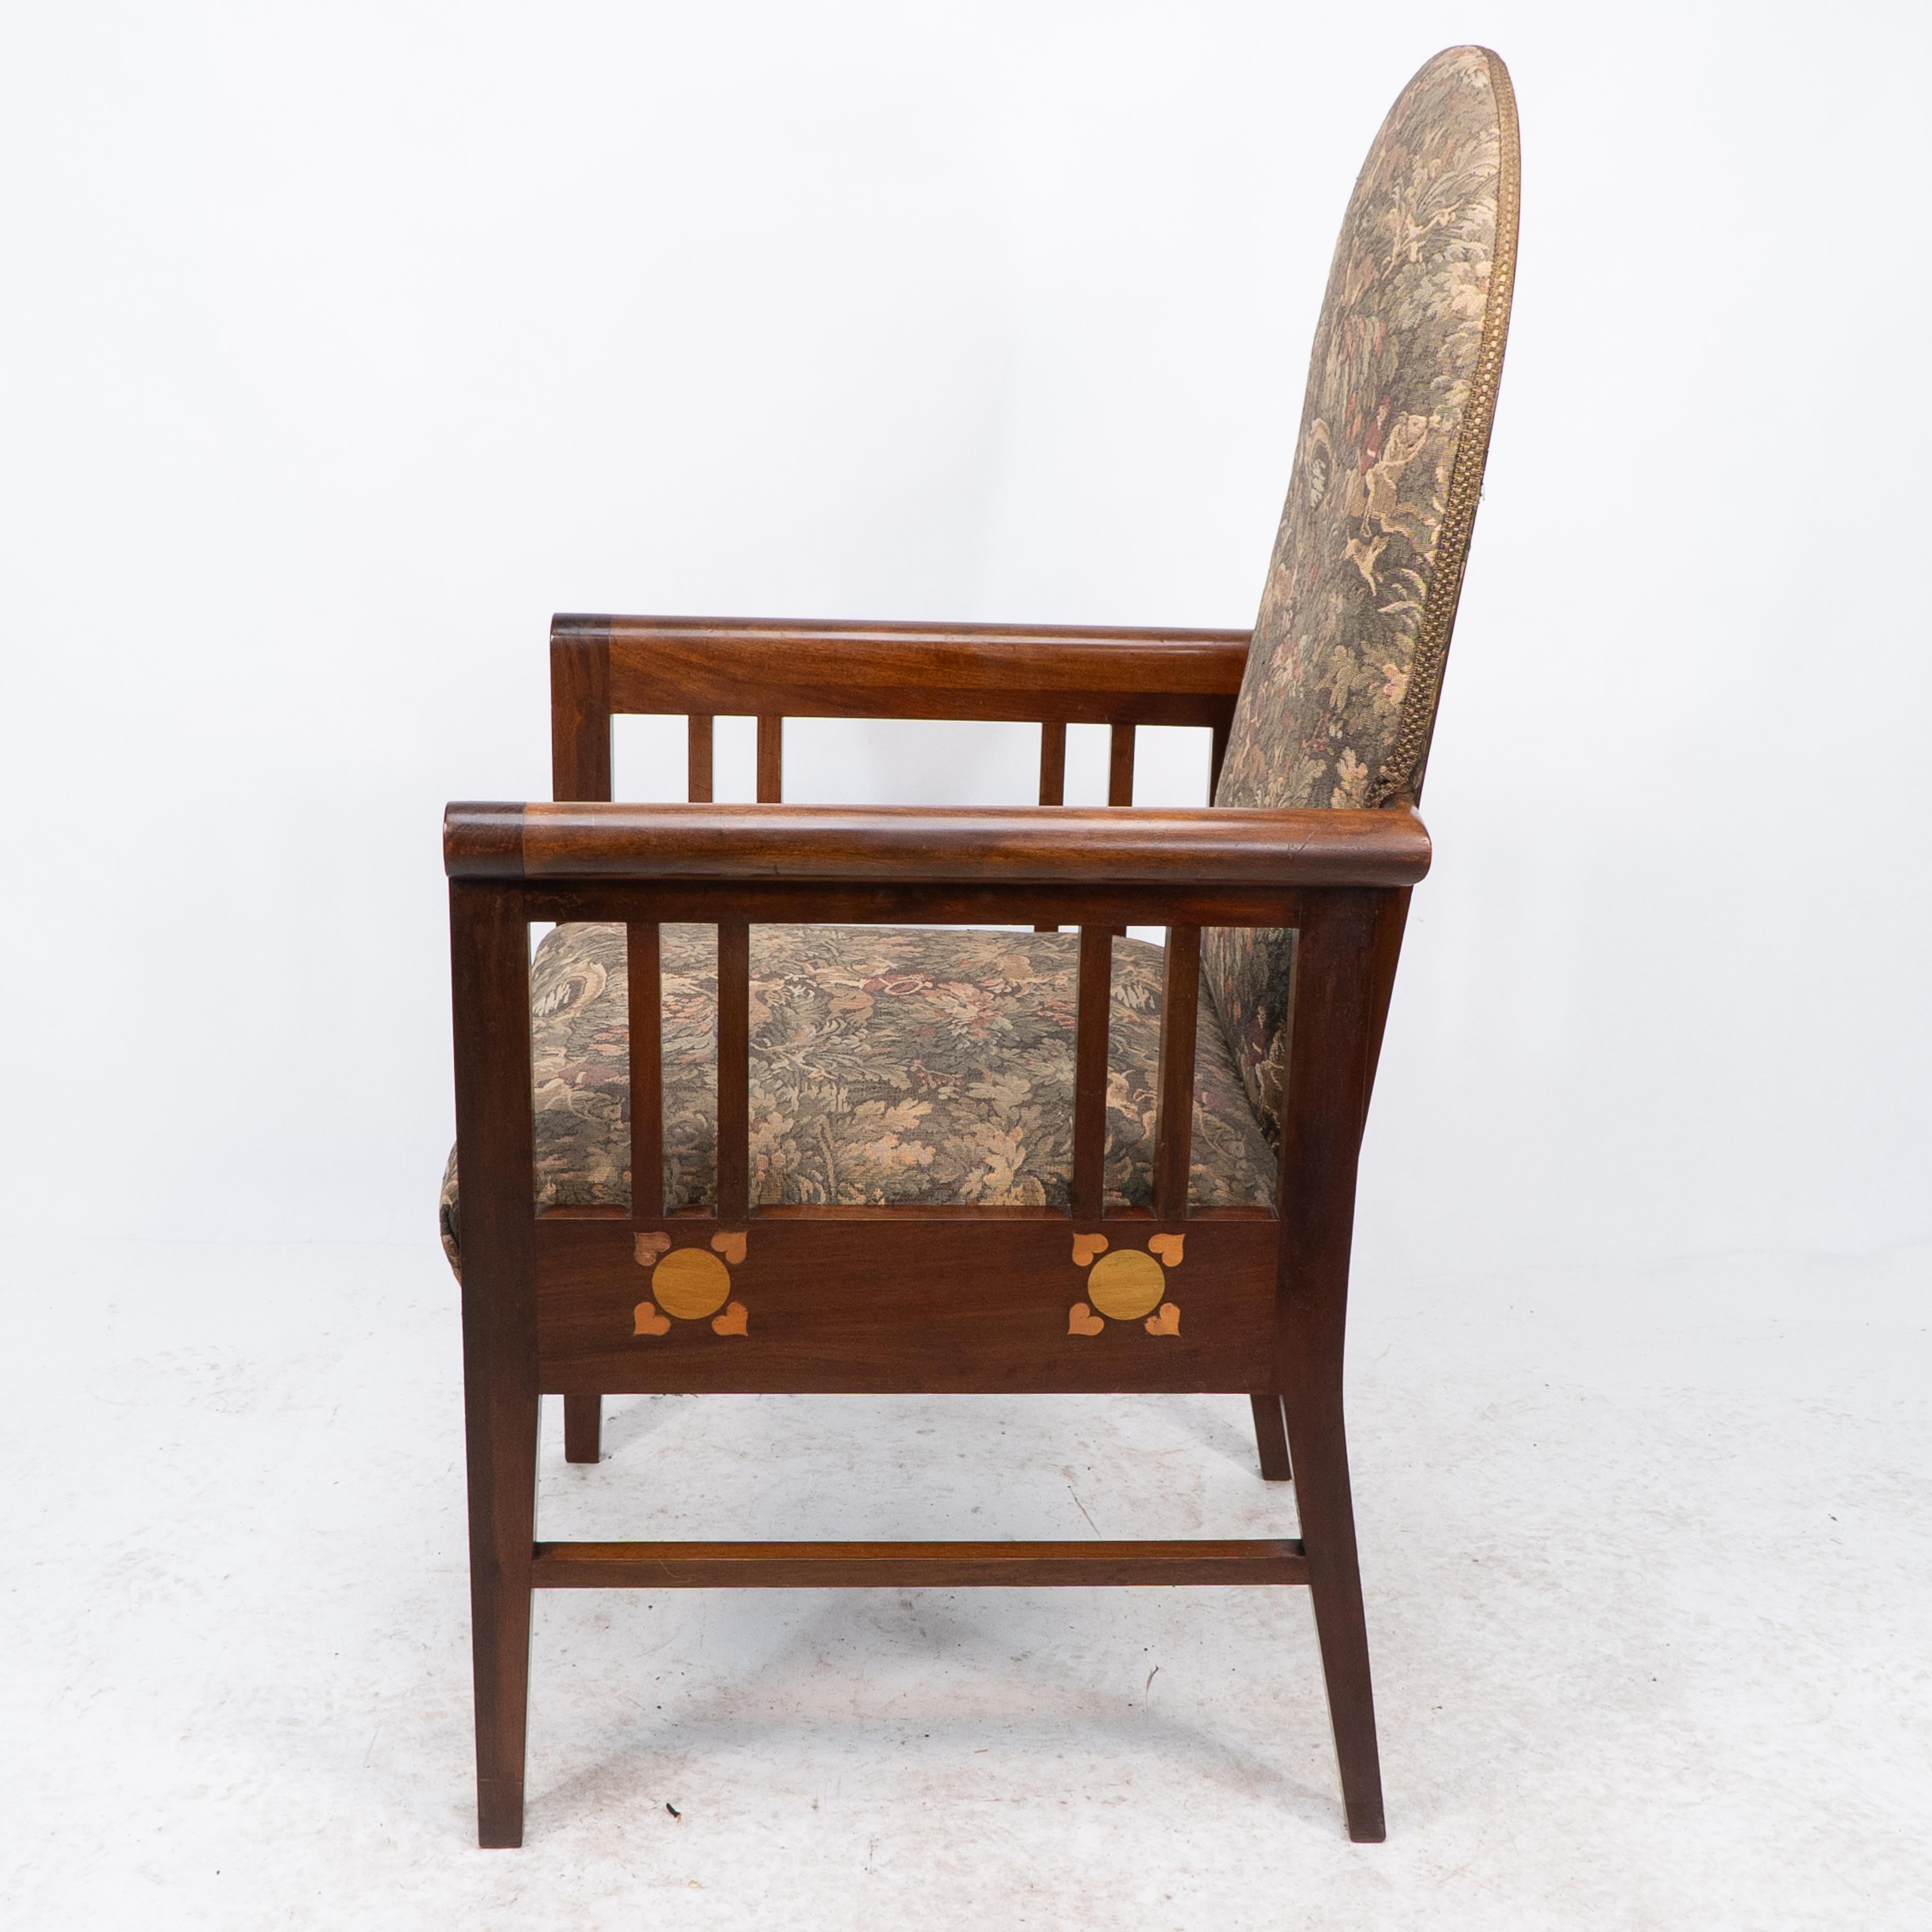 English G M Ellwood for J S Henry. A Progressive New Art armchair with fruitwood inlays For Sale